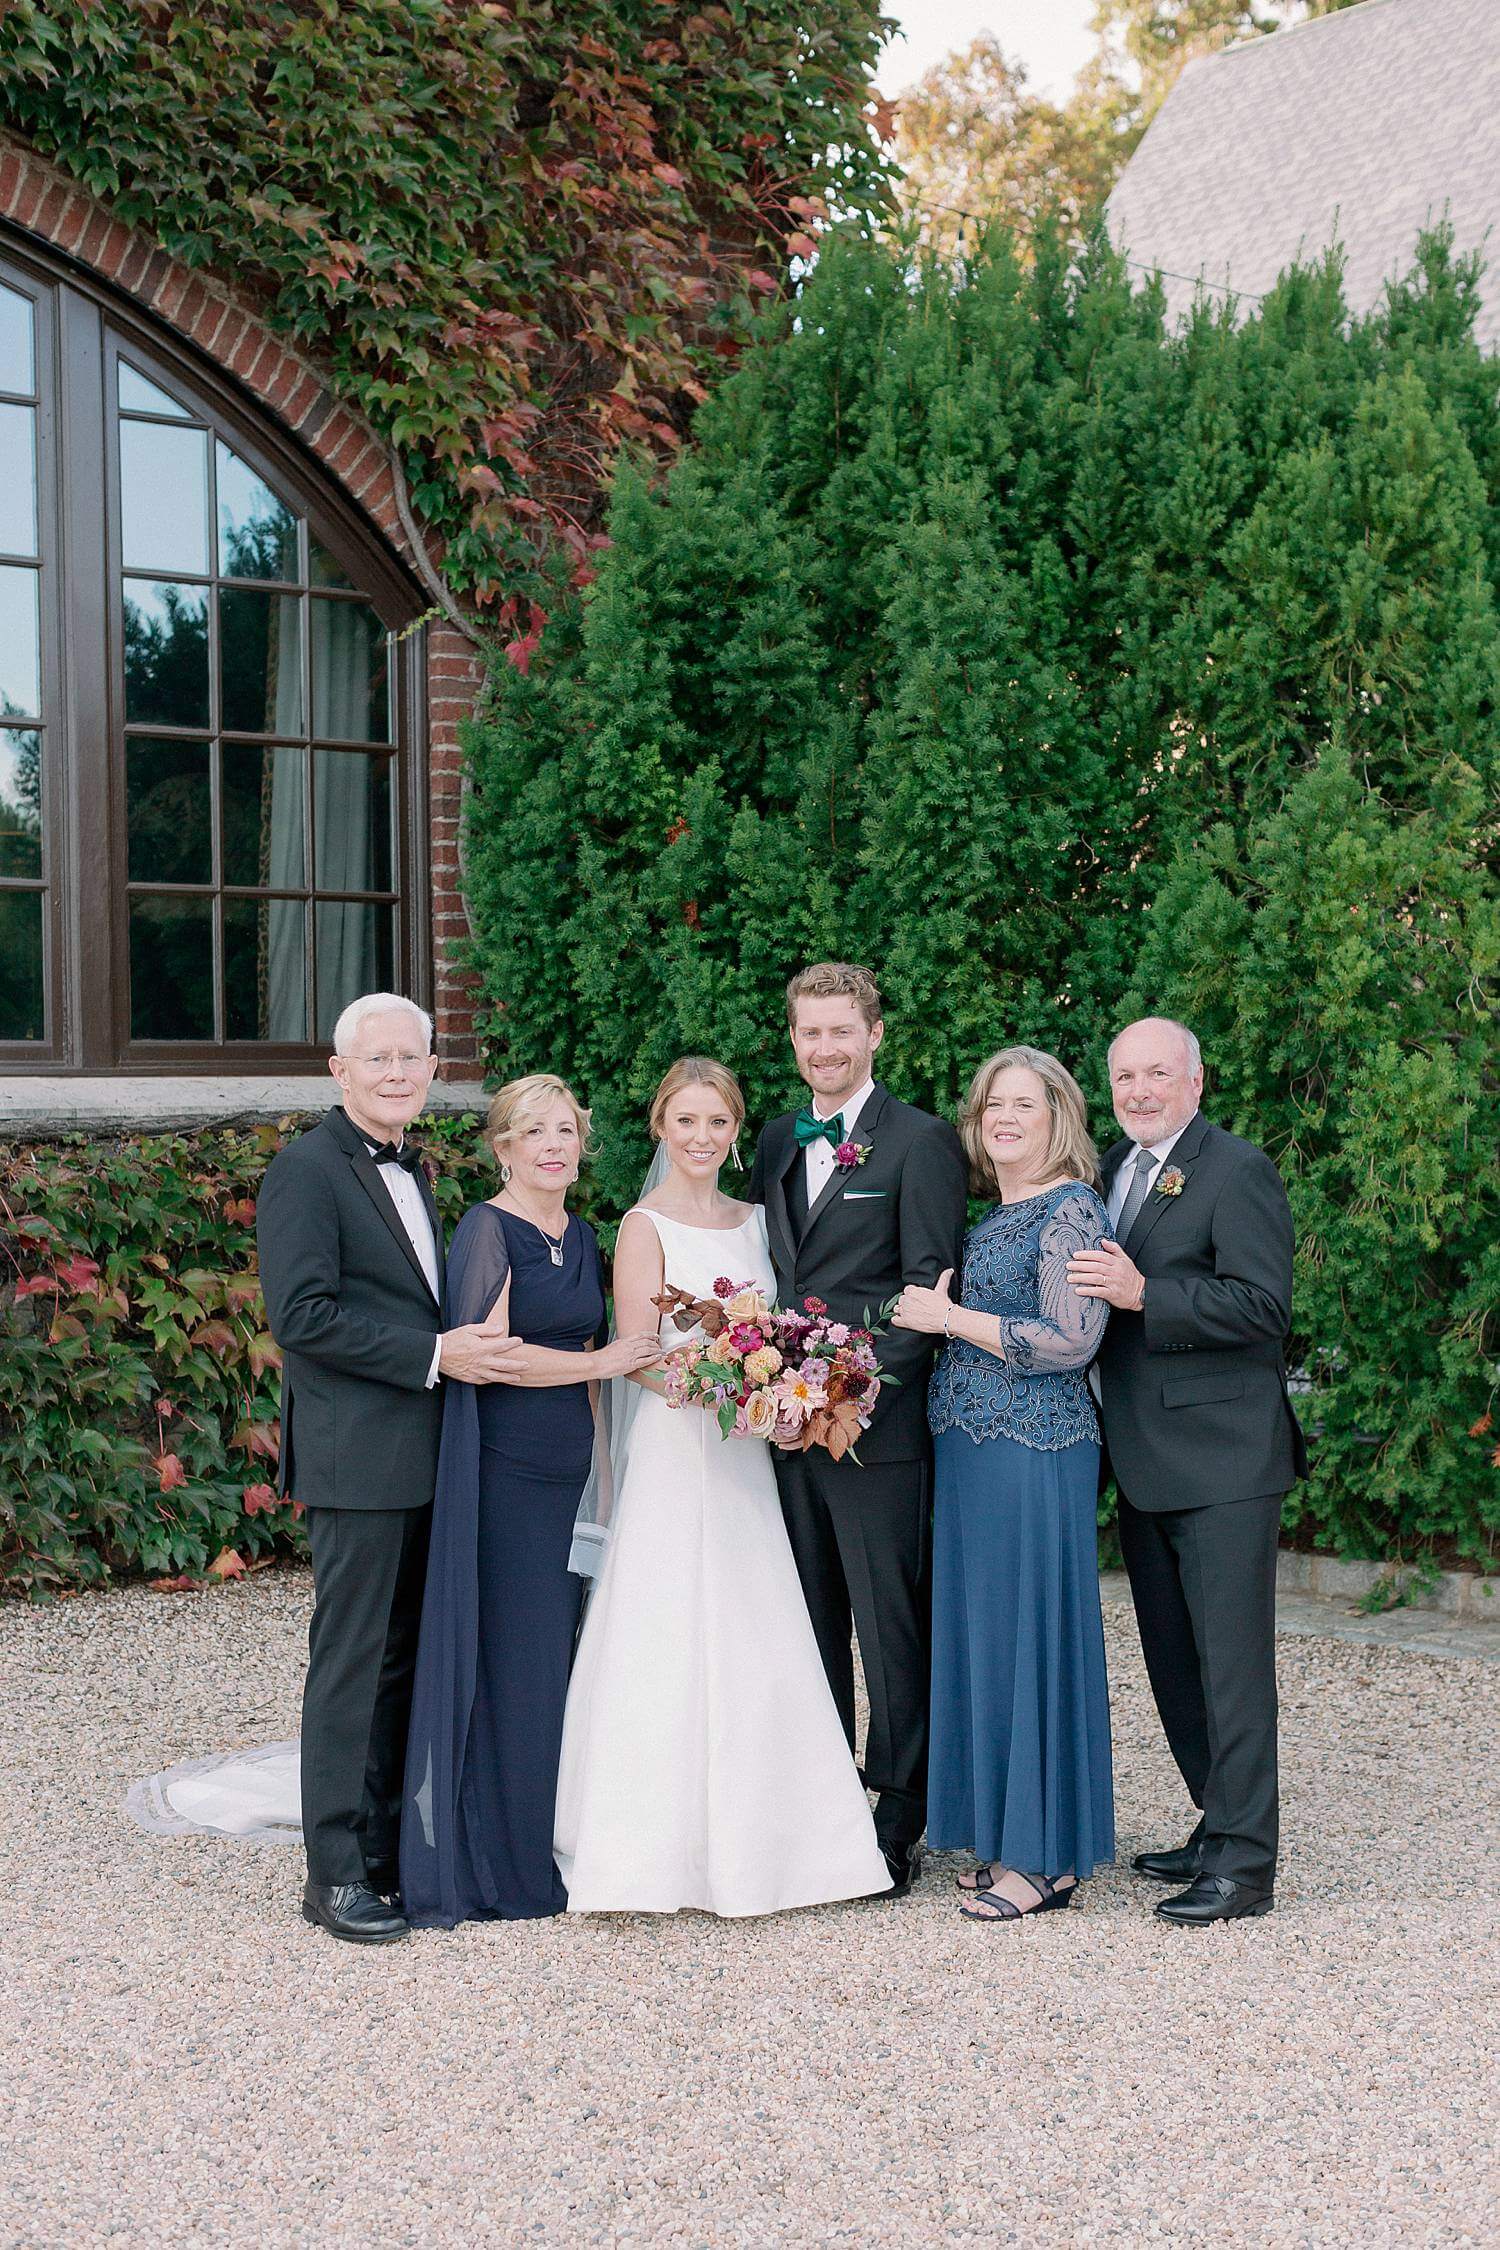 Family portrait for bride and her family during a wedding at Dover Hall Estate.